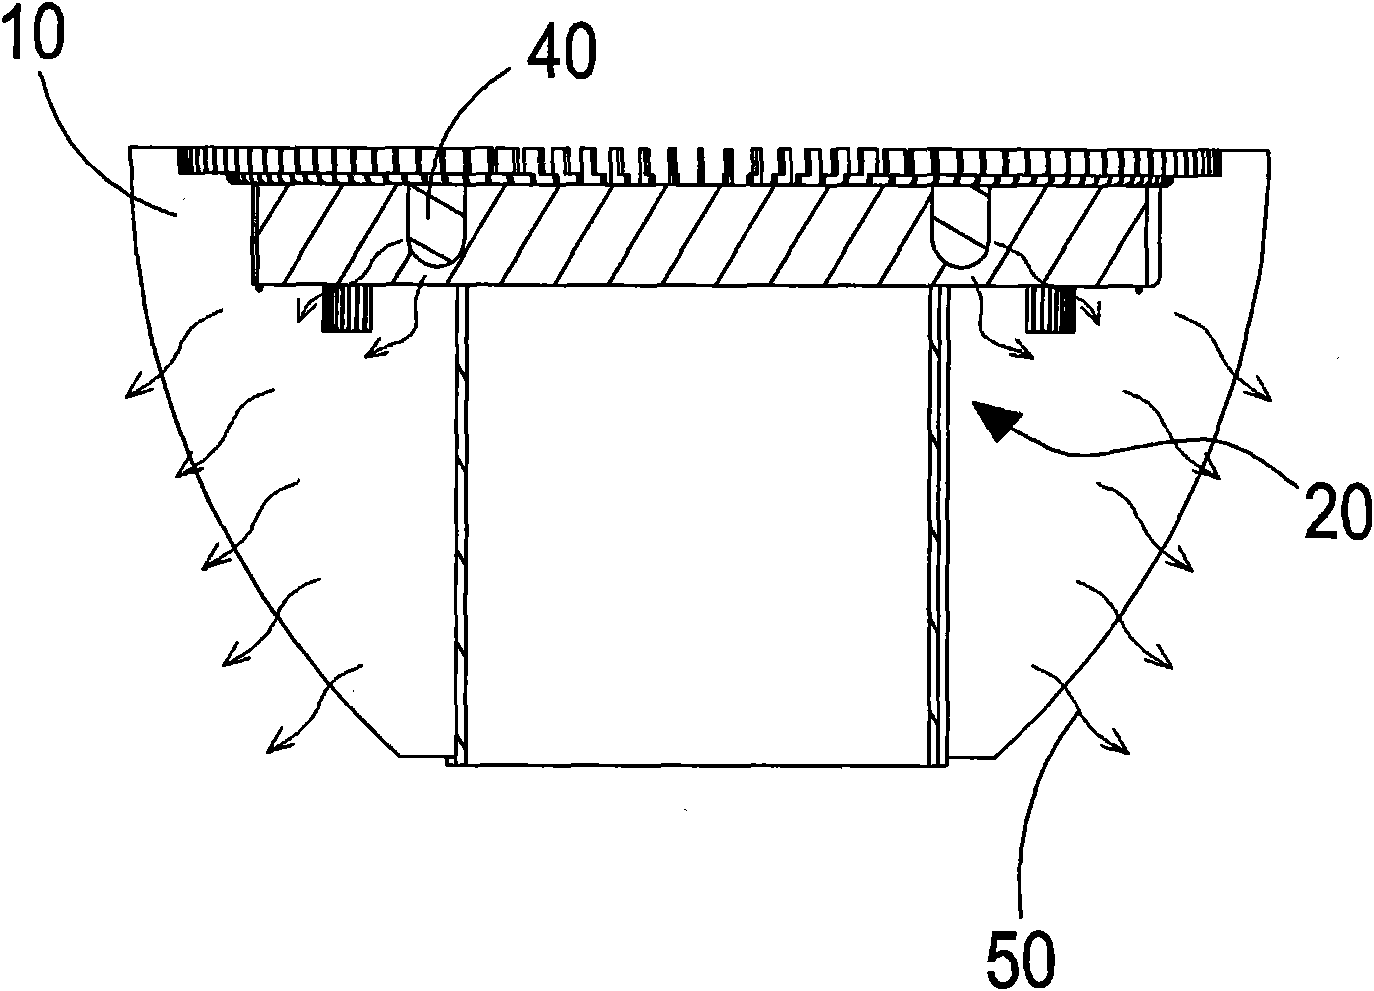 Radiating structure of electronic assemblies